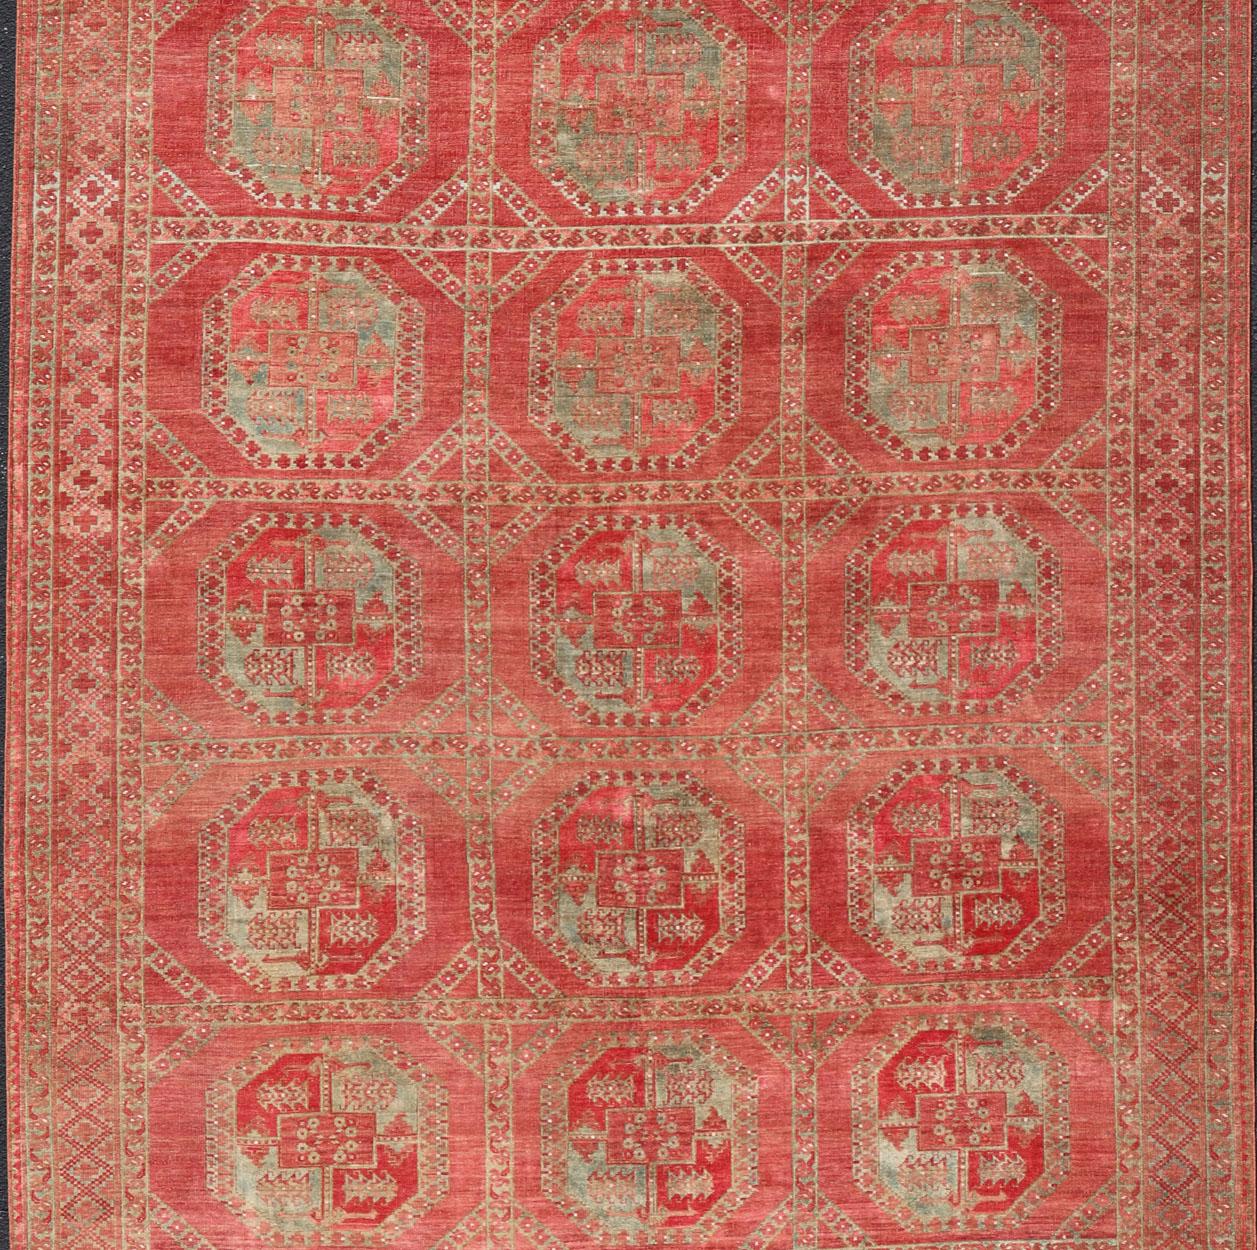 20th Century Hand-Knotted Wool Ersari Rug in Wool with Gul Design in Shades of Red & Green